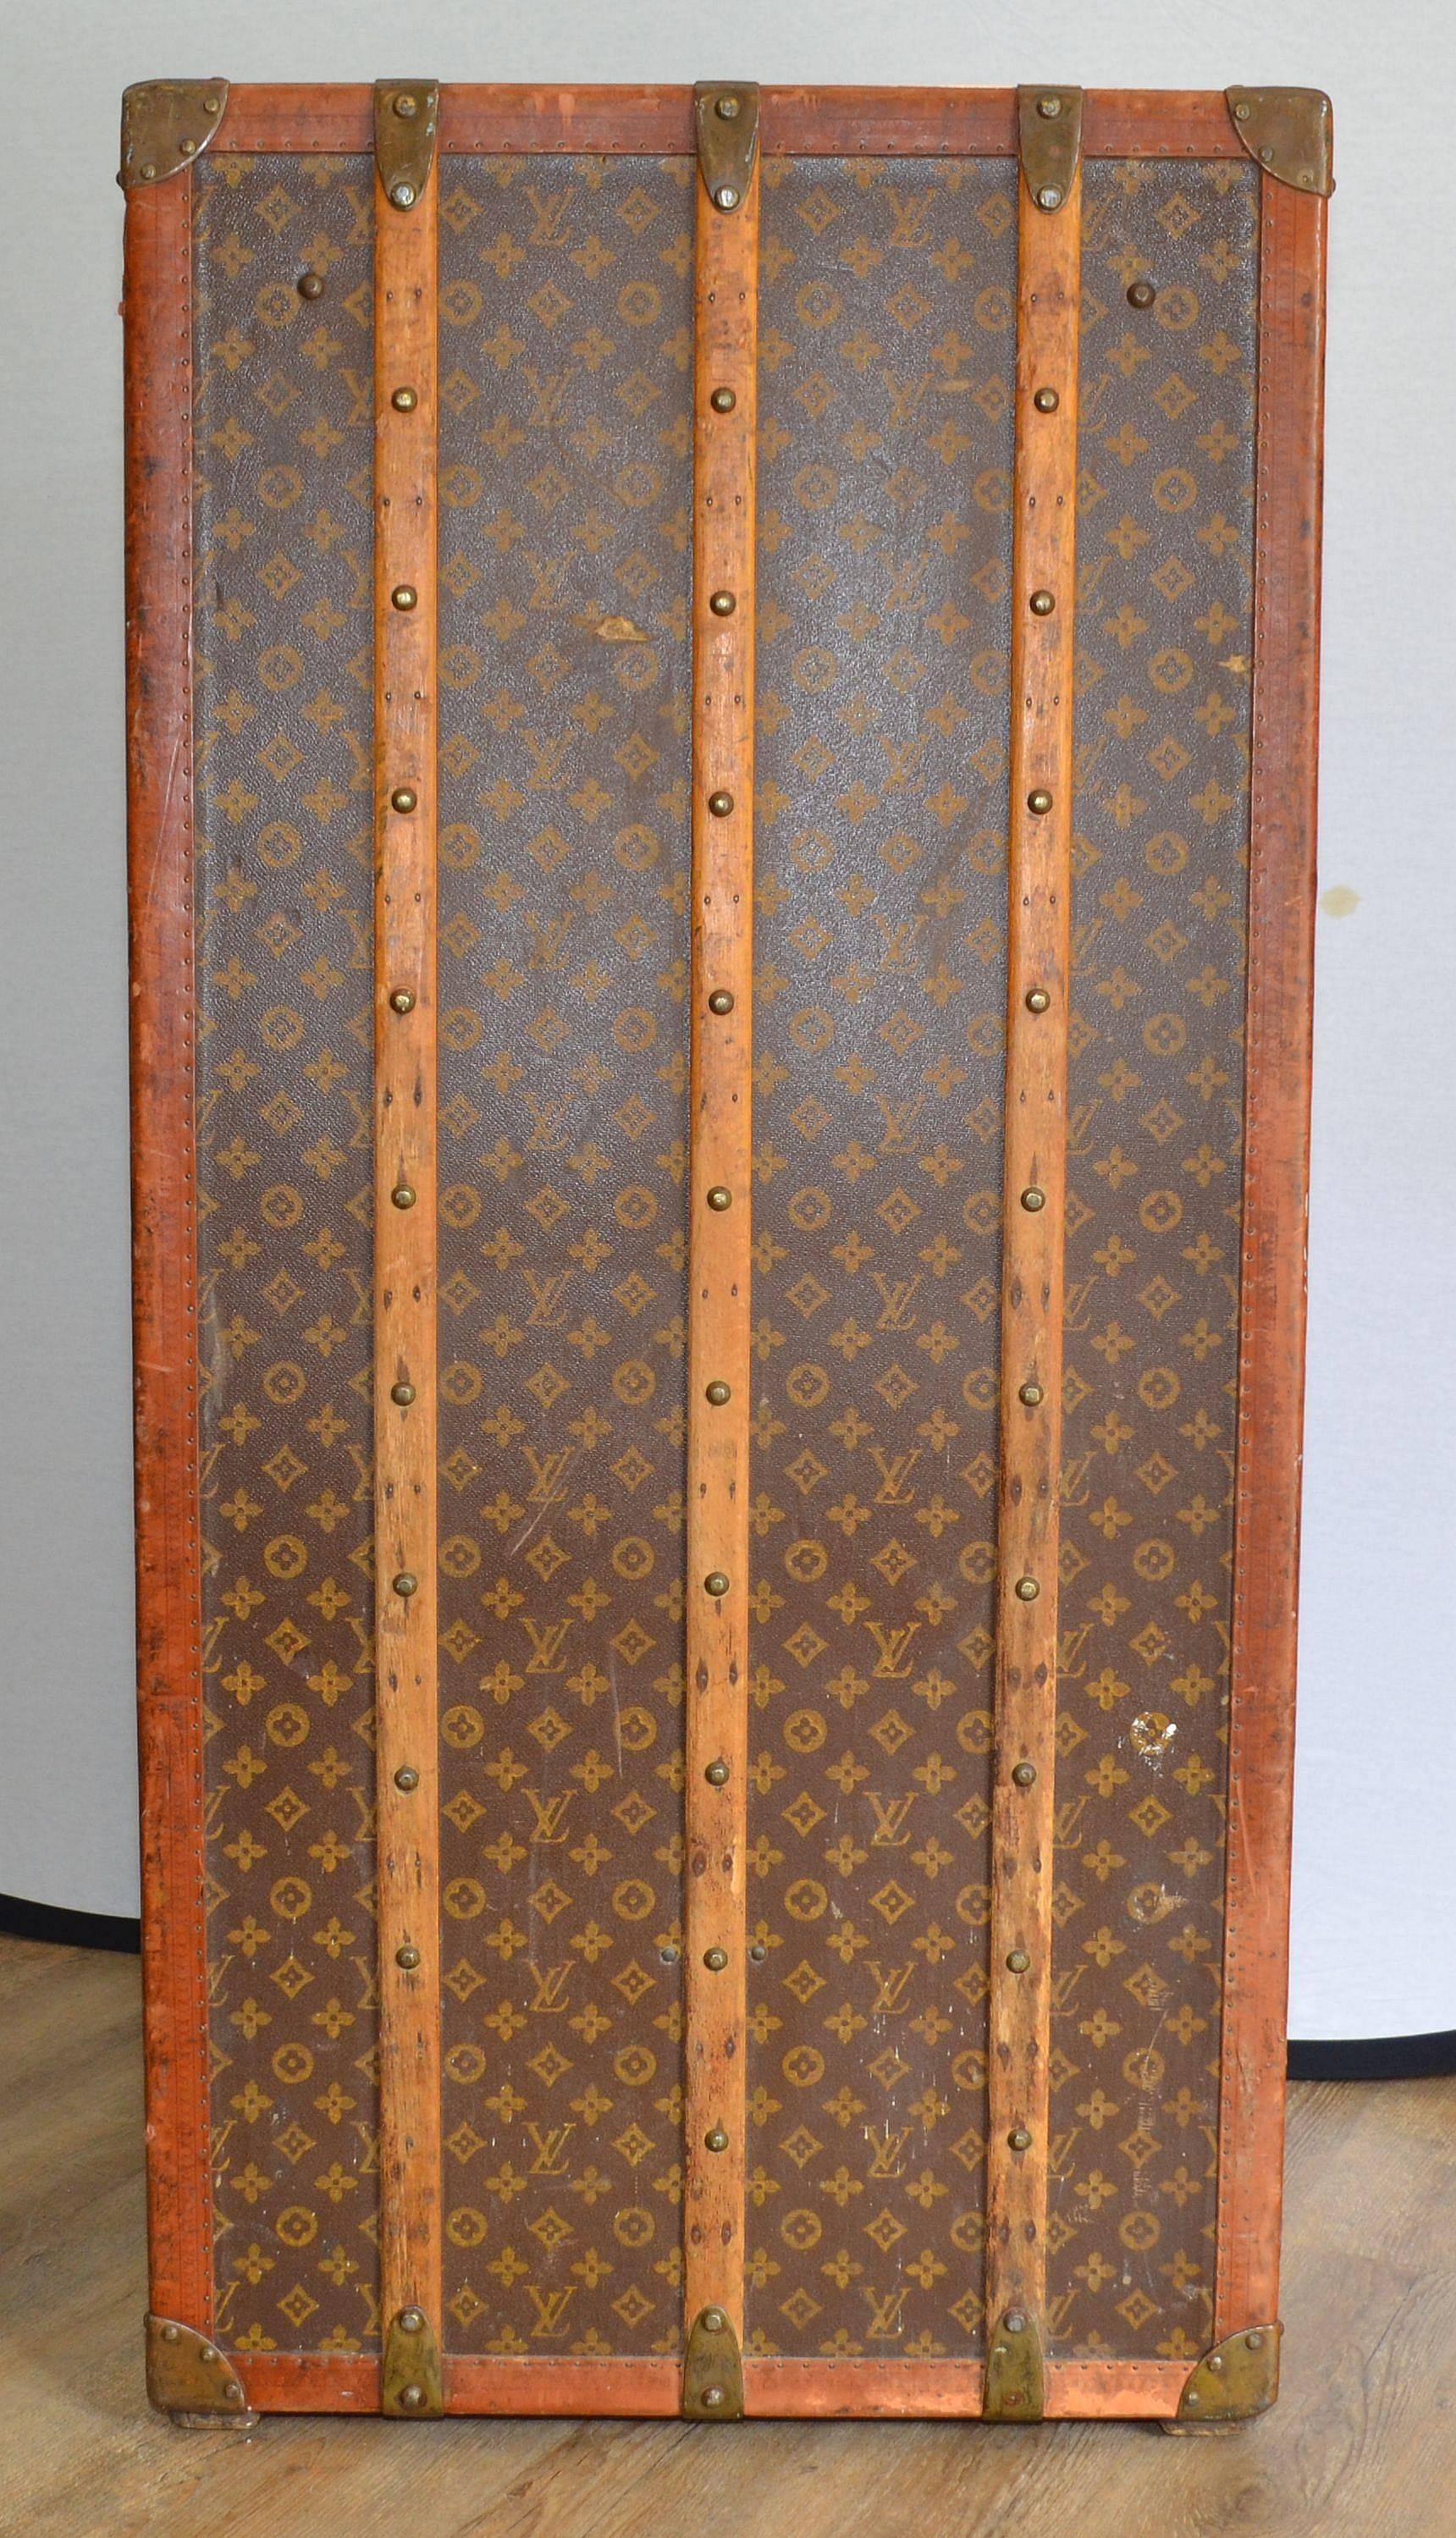 Louis Vuitton trunk case featured in its signature monogram throughout with aged hardware (hardware has LV markings). Case has some visible dings and scratches as pictured. Interior retains original trays, removable case, hangers, and dust cover.